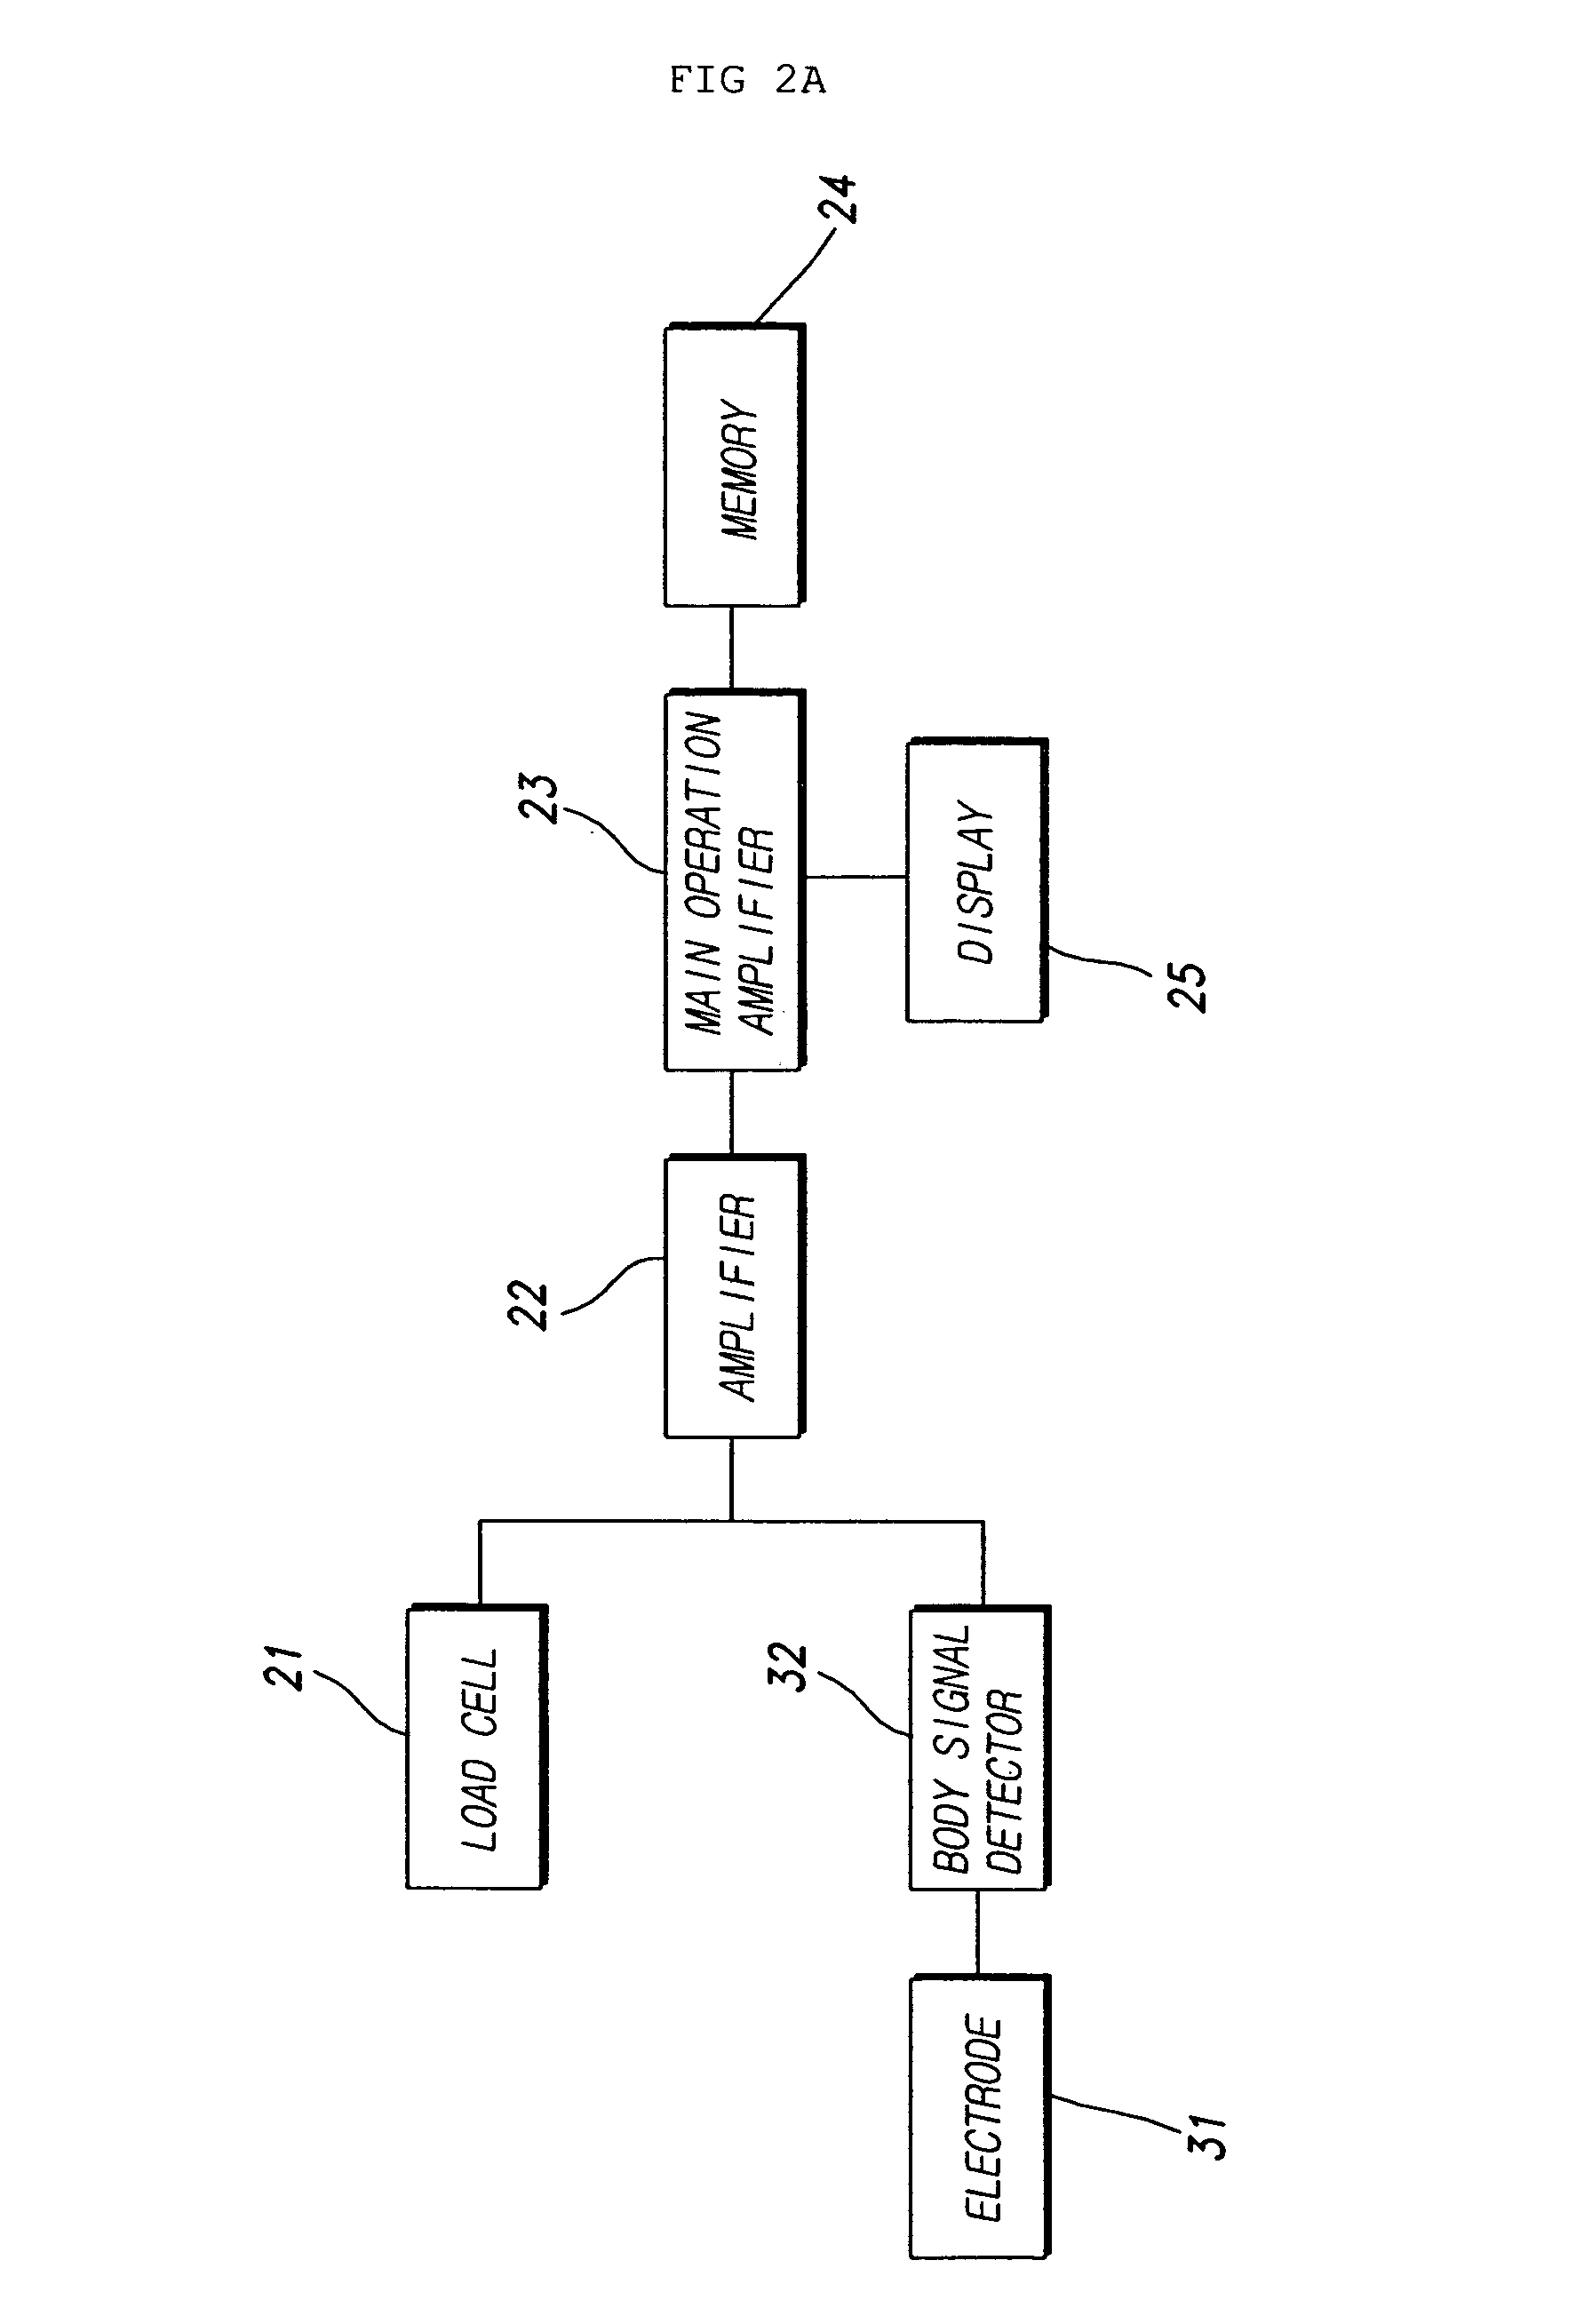 Weight scale having function of pulse rate meter or heartbeat rate meter